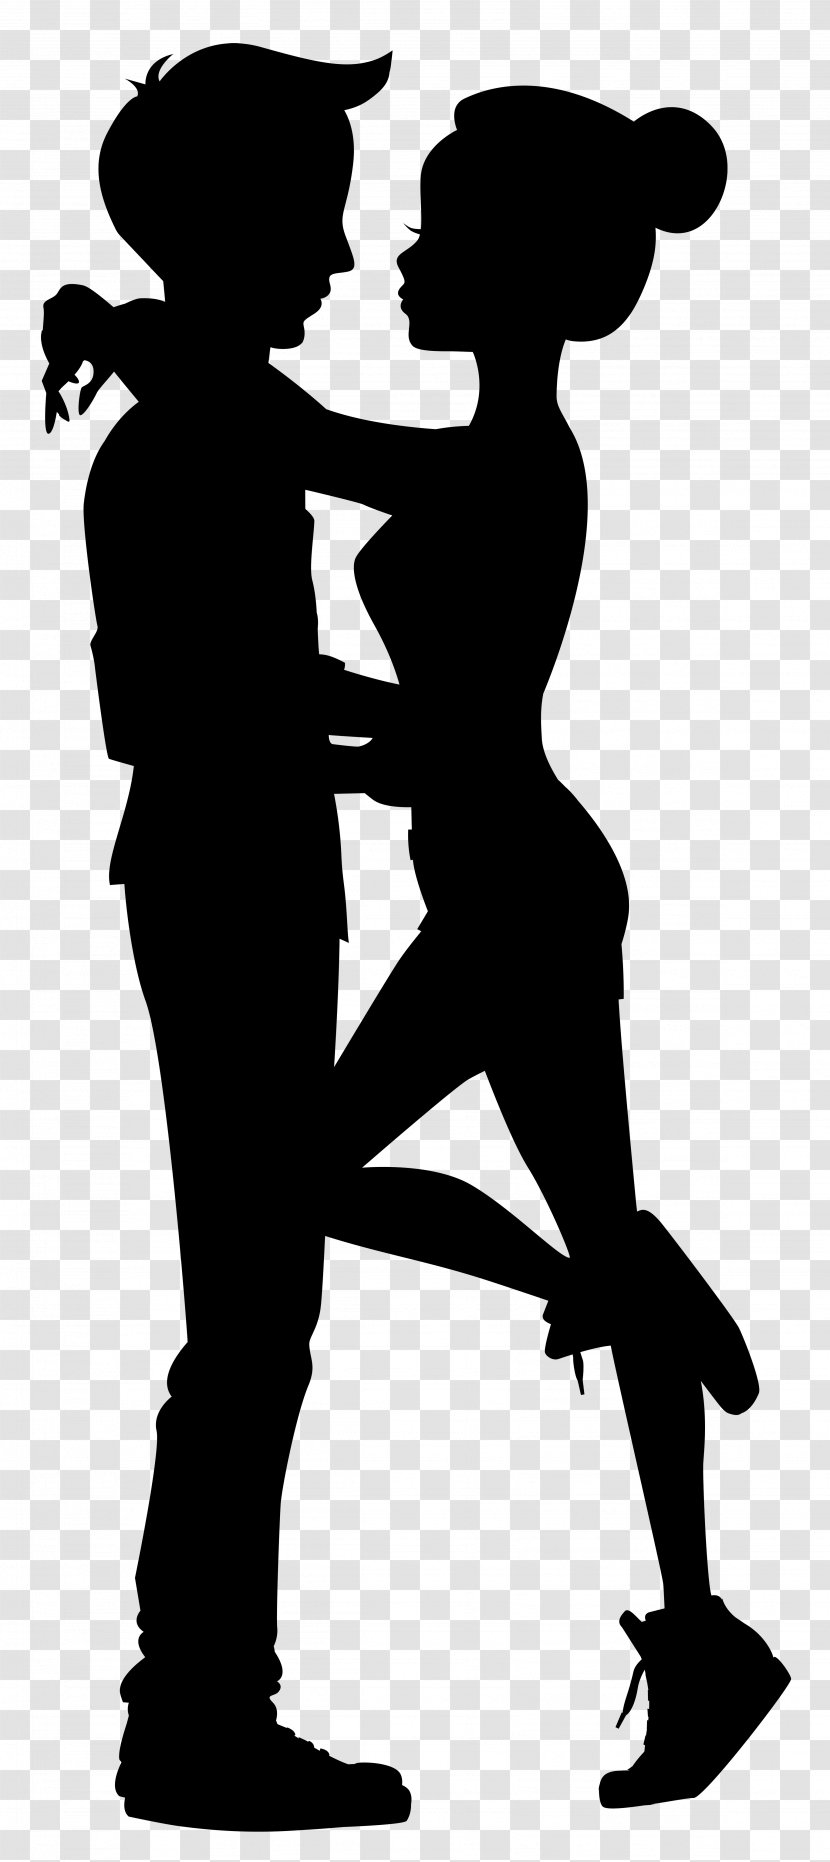 Silhouette Drawing Clip Art - Royalty Free - Cute Couple Silhouettes Image Transparent PNG